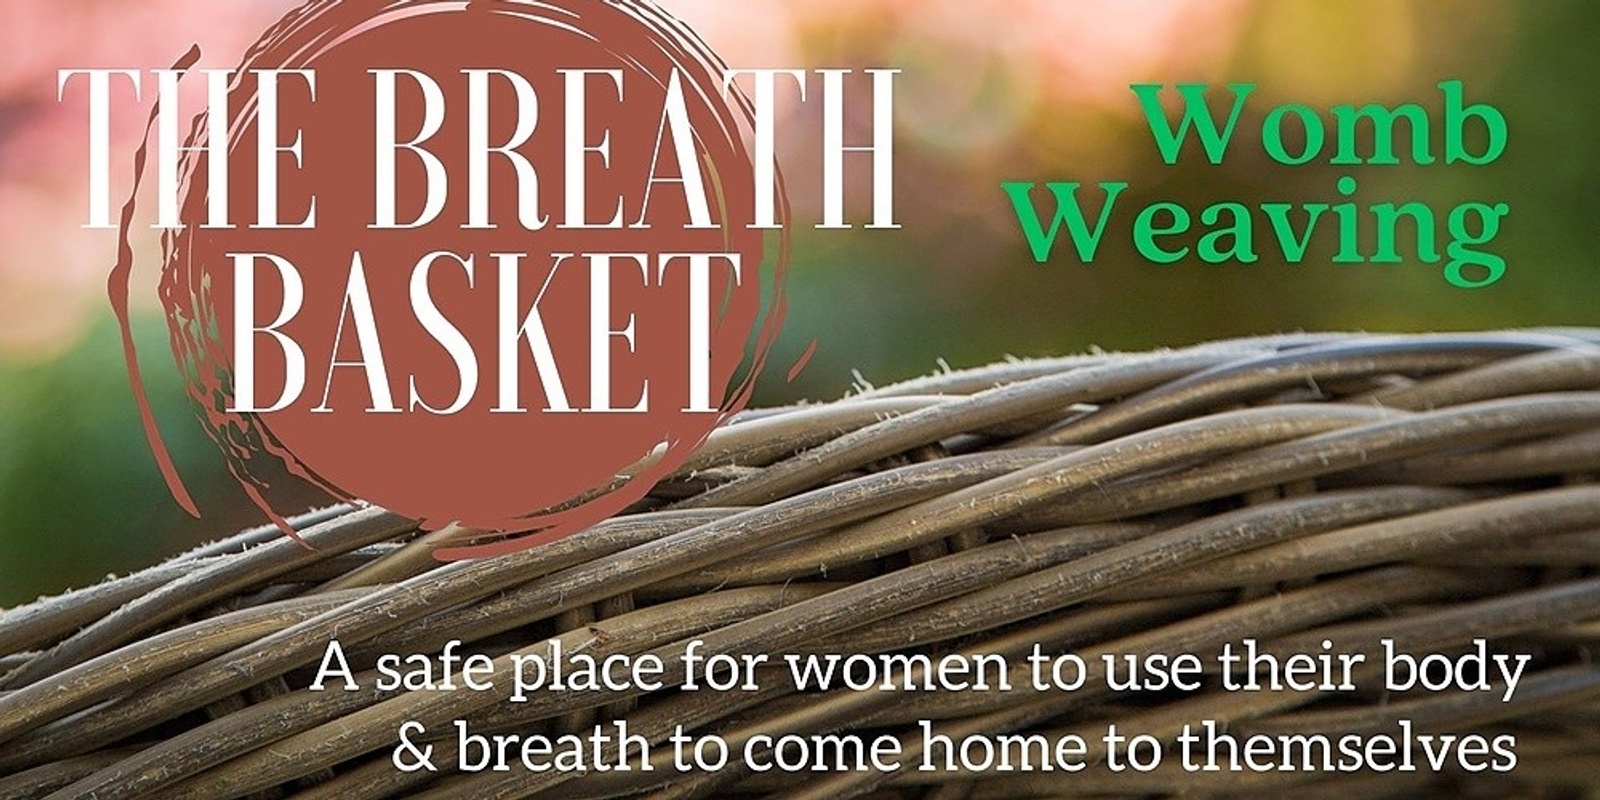 THE BREATH BASKET: A Women's Breathwork Ceremony (Womb Weaving session)